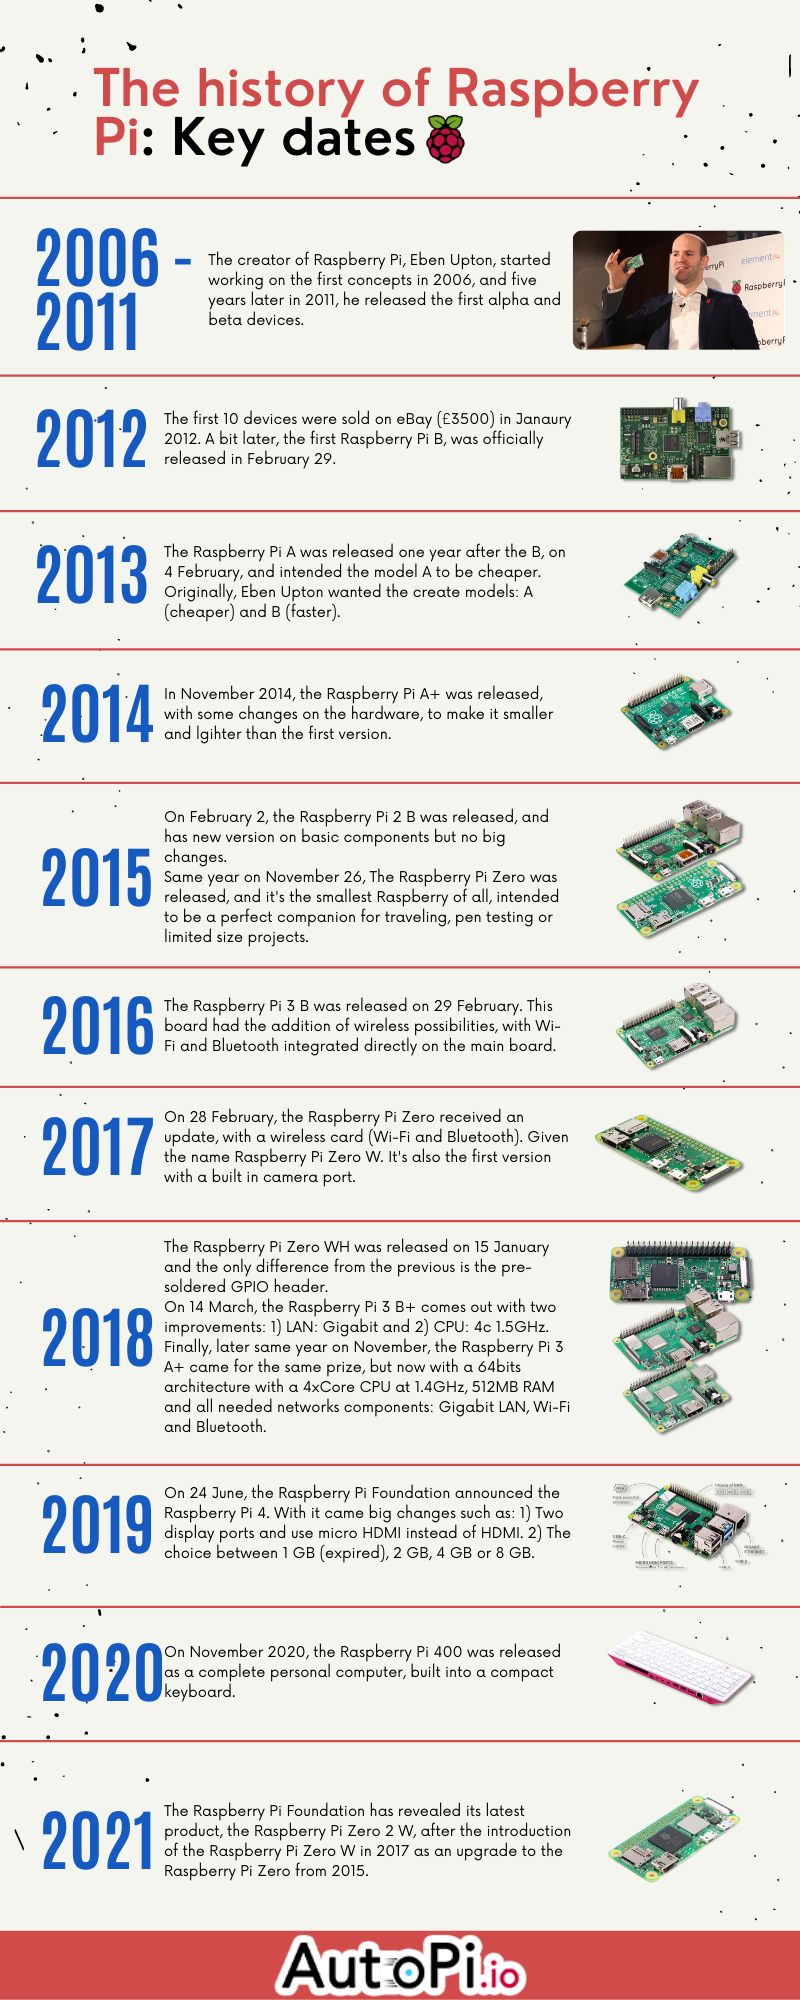 A timeline history of all Raspberry Pi models